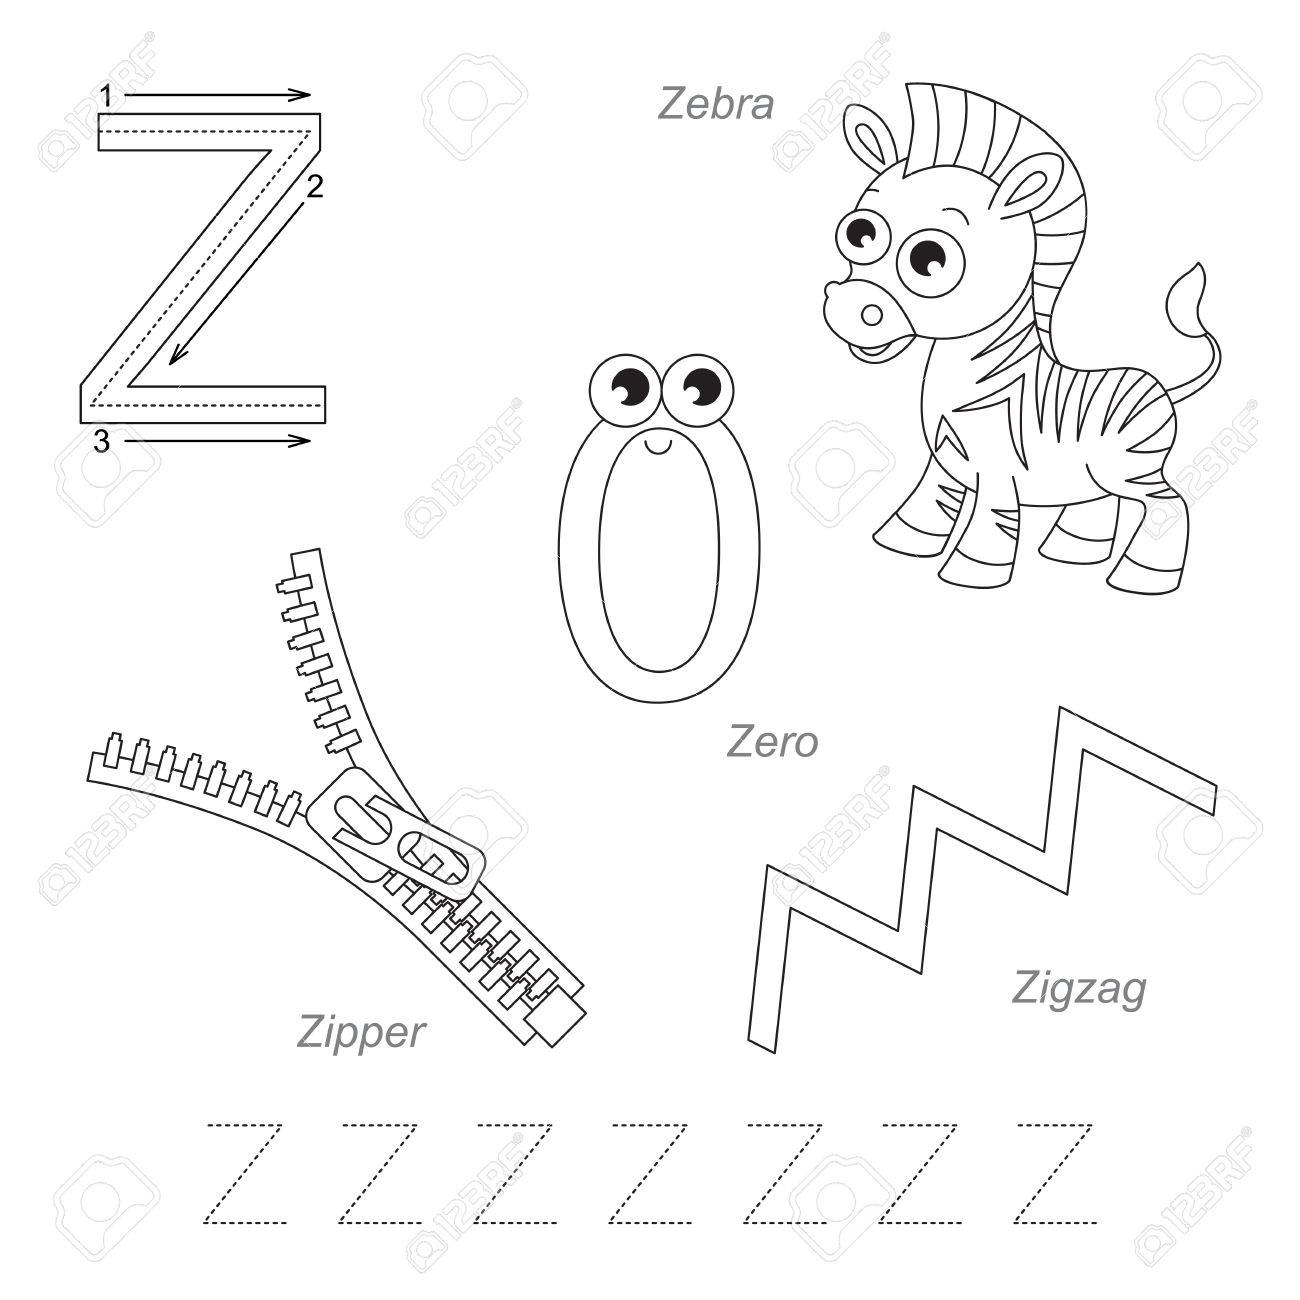 Tracing Worksheet For Children. Full English Alphabet From A.. with Letter Z Tracing Preschool